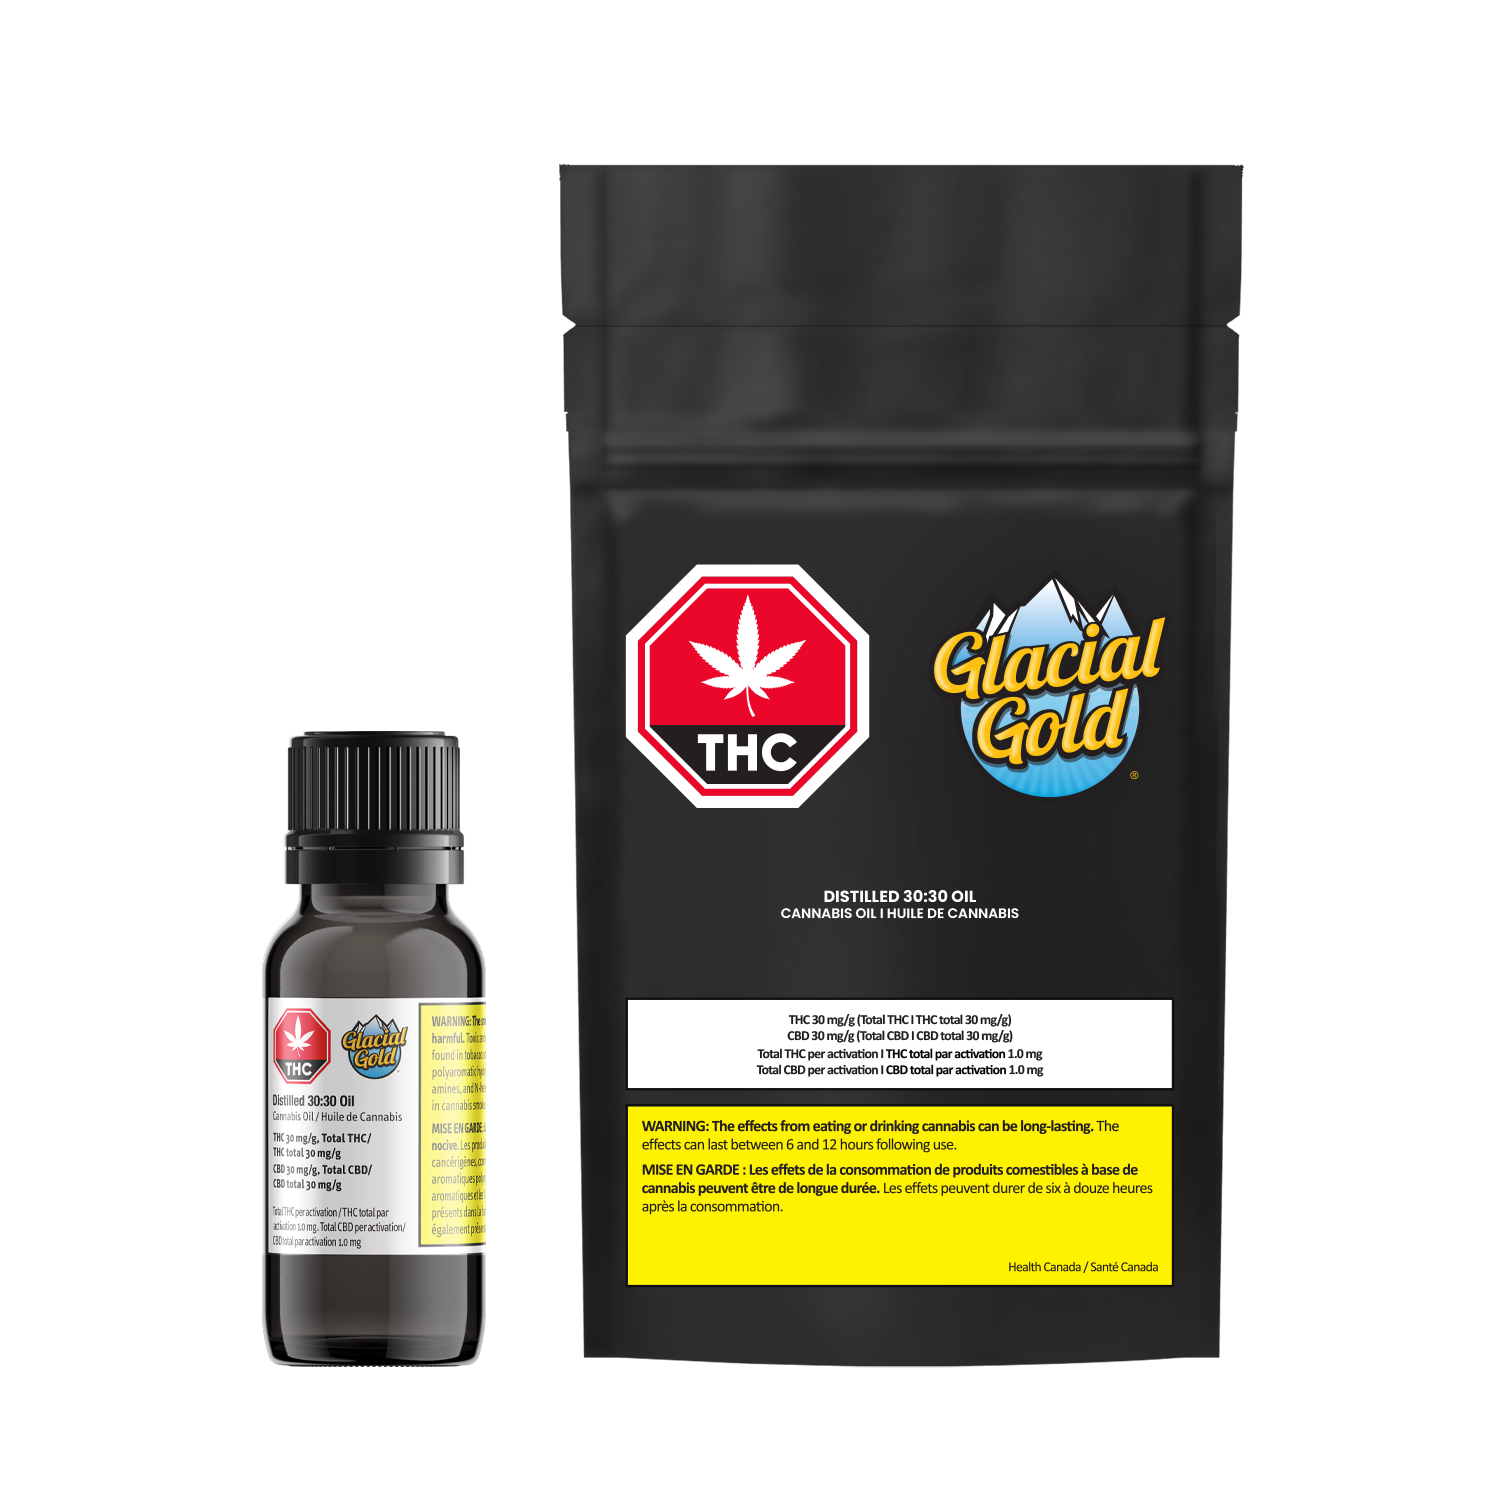 Cannabis Product Glacial Gold - Distilled 30:30 Oil Drops by Glacial Gold - 1